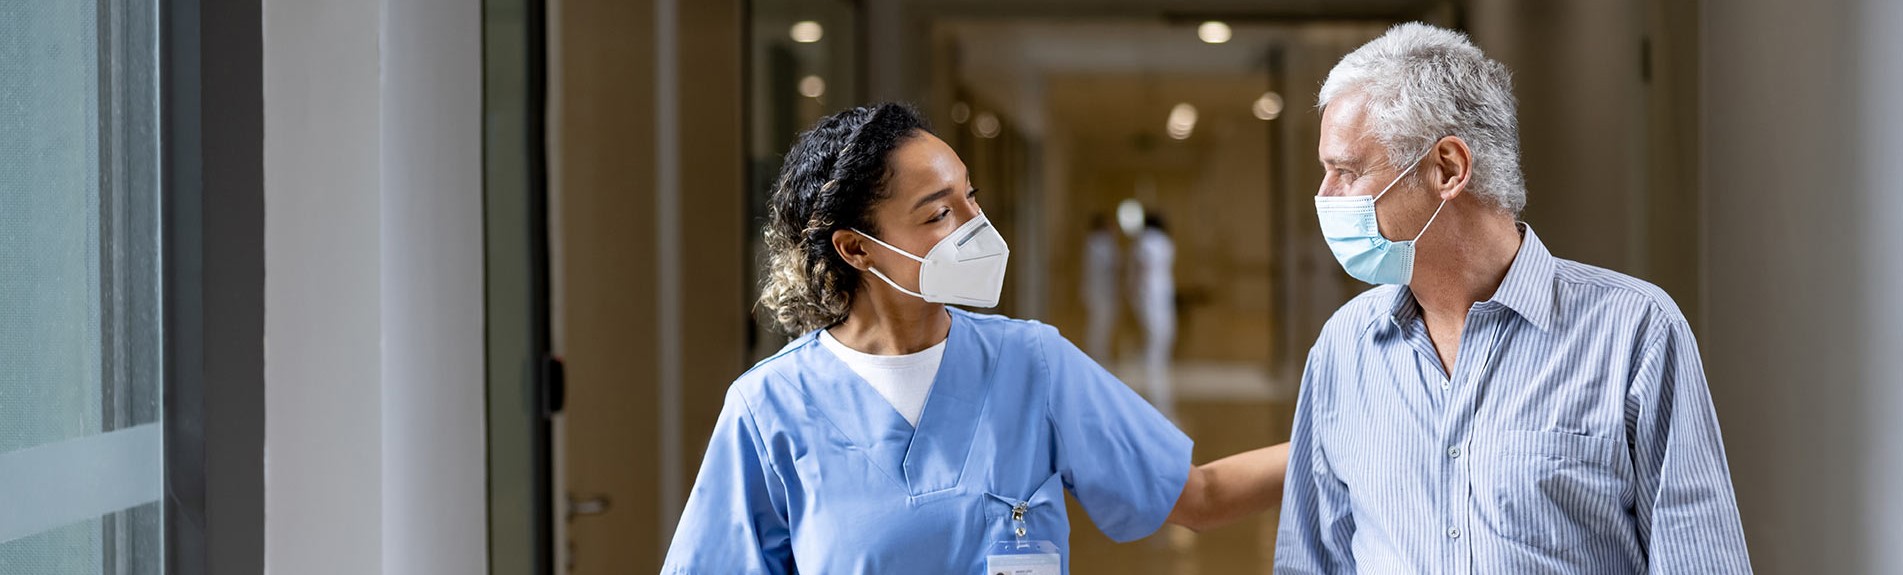 Doctor Talking To A Patient In The Corridor Of A Hospital While Wearing Face Masks